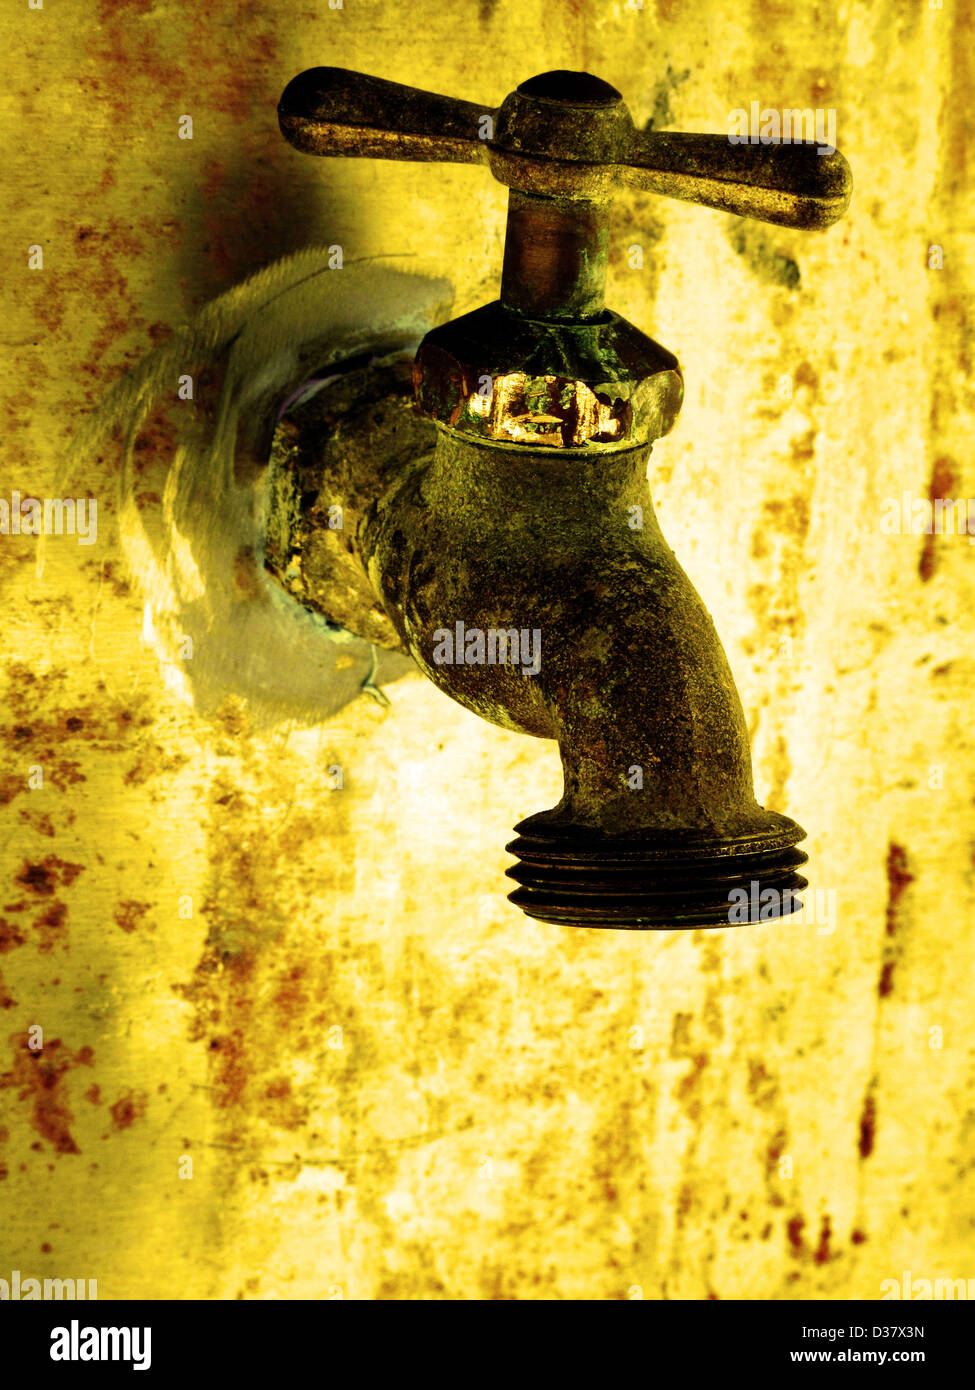 Water faucet dripping water with golden background on hot day Stock Photo